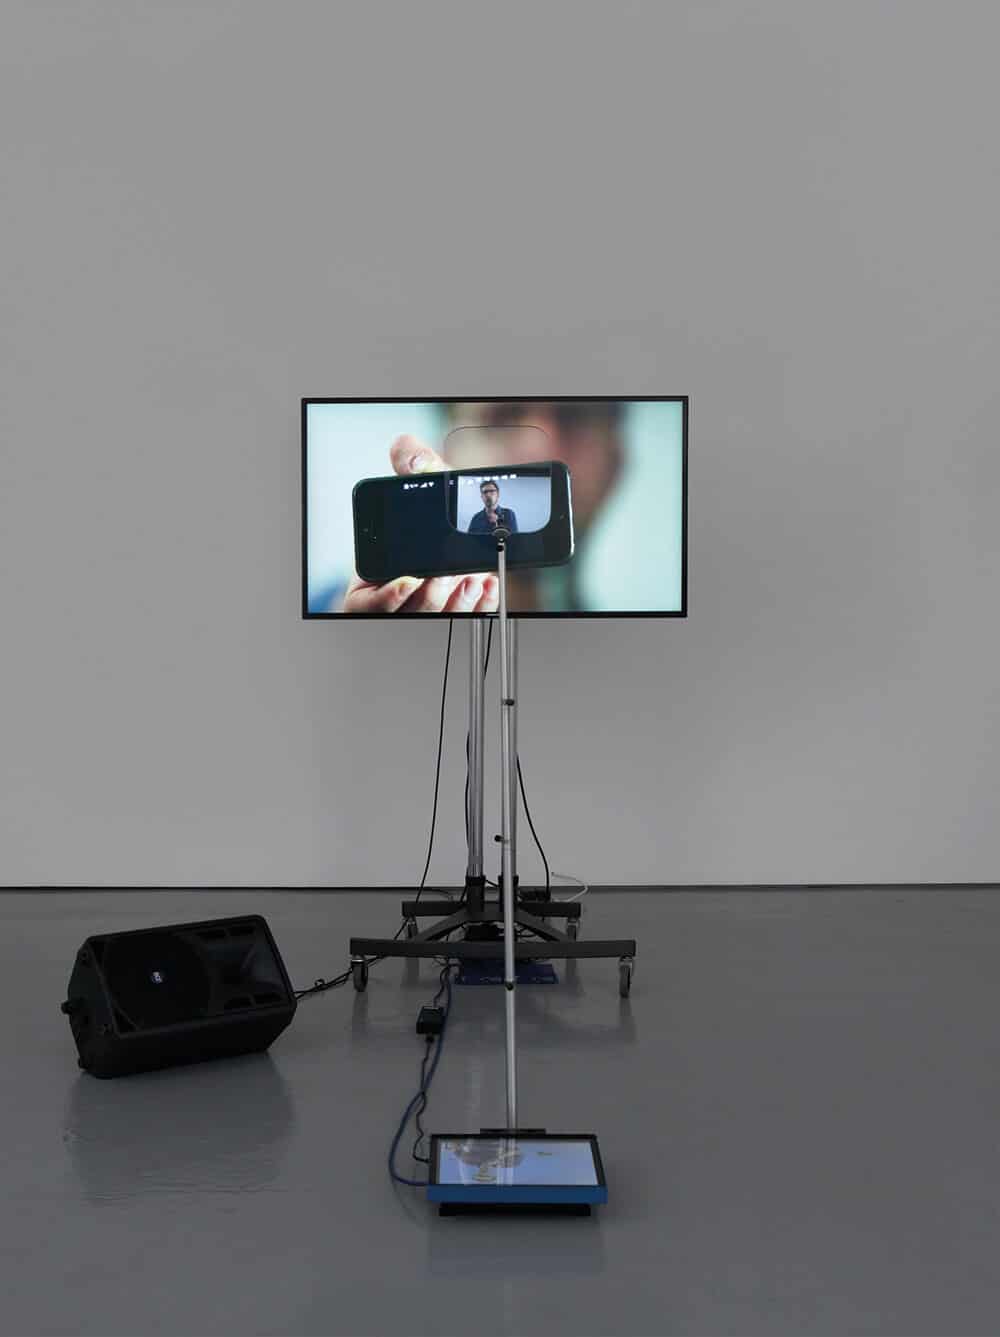 Lawrence Abu Hamdan, Contra Diction (speech against itself), 2015. Two channel video installation, teleprompter, screen, speaker variable dimensions. © Lawrence Abu Hamdan. Courtesy Maureen Paley, London.